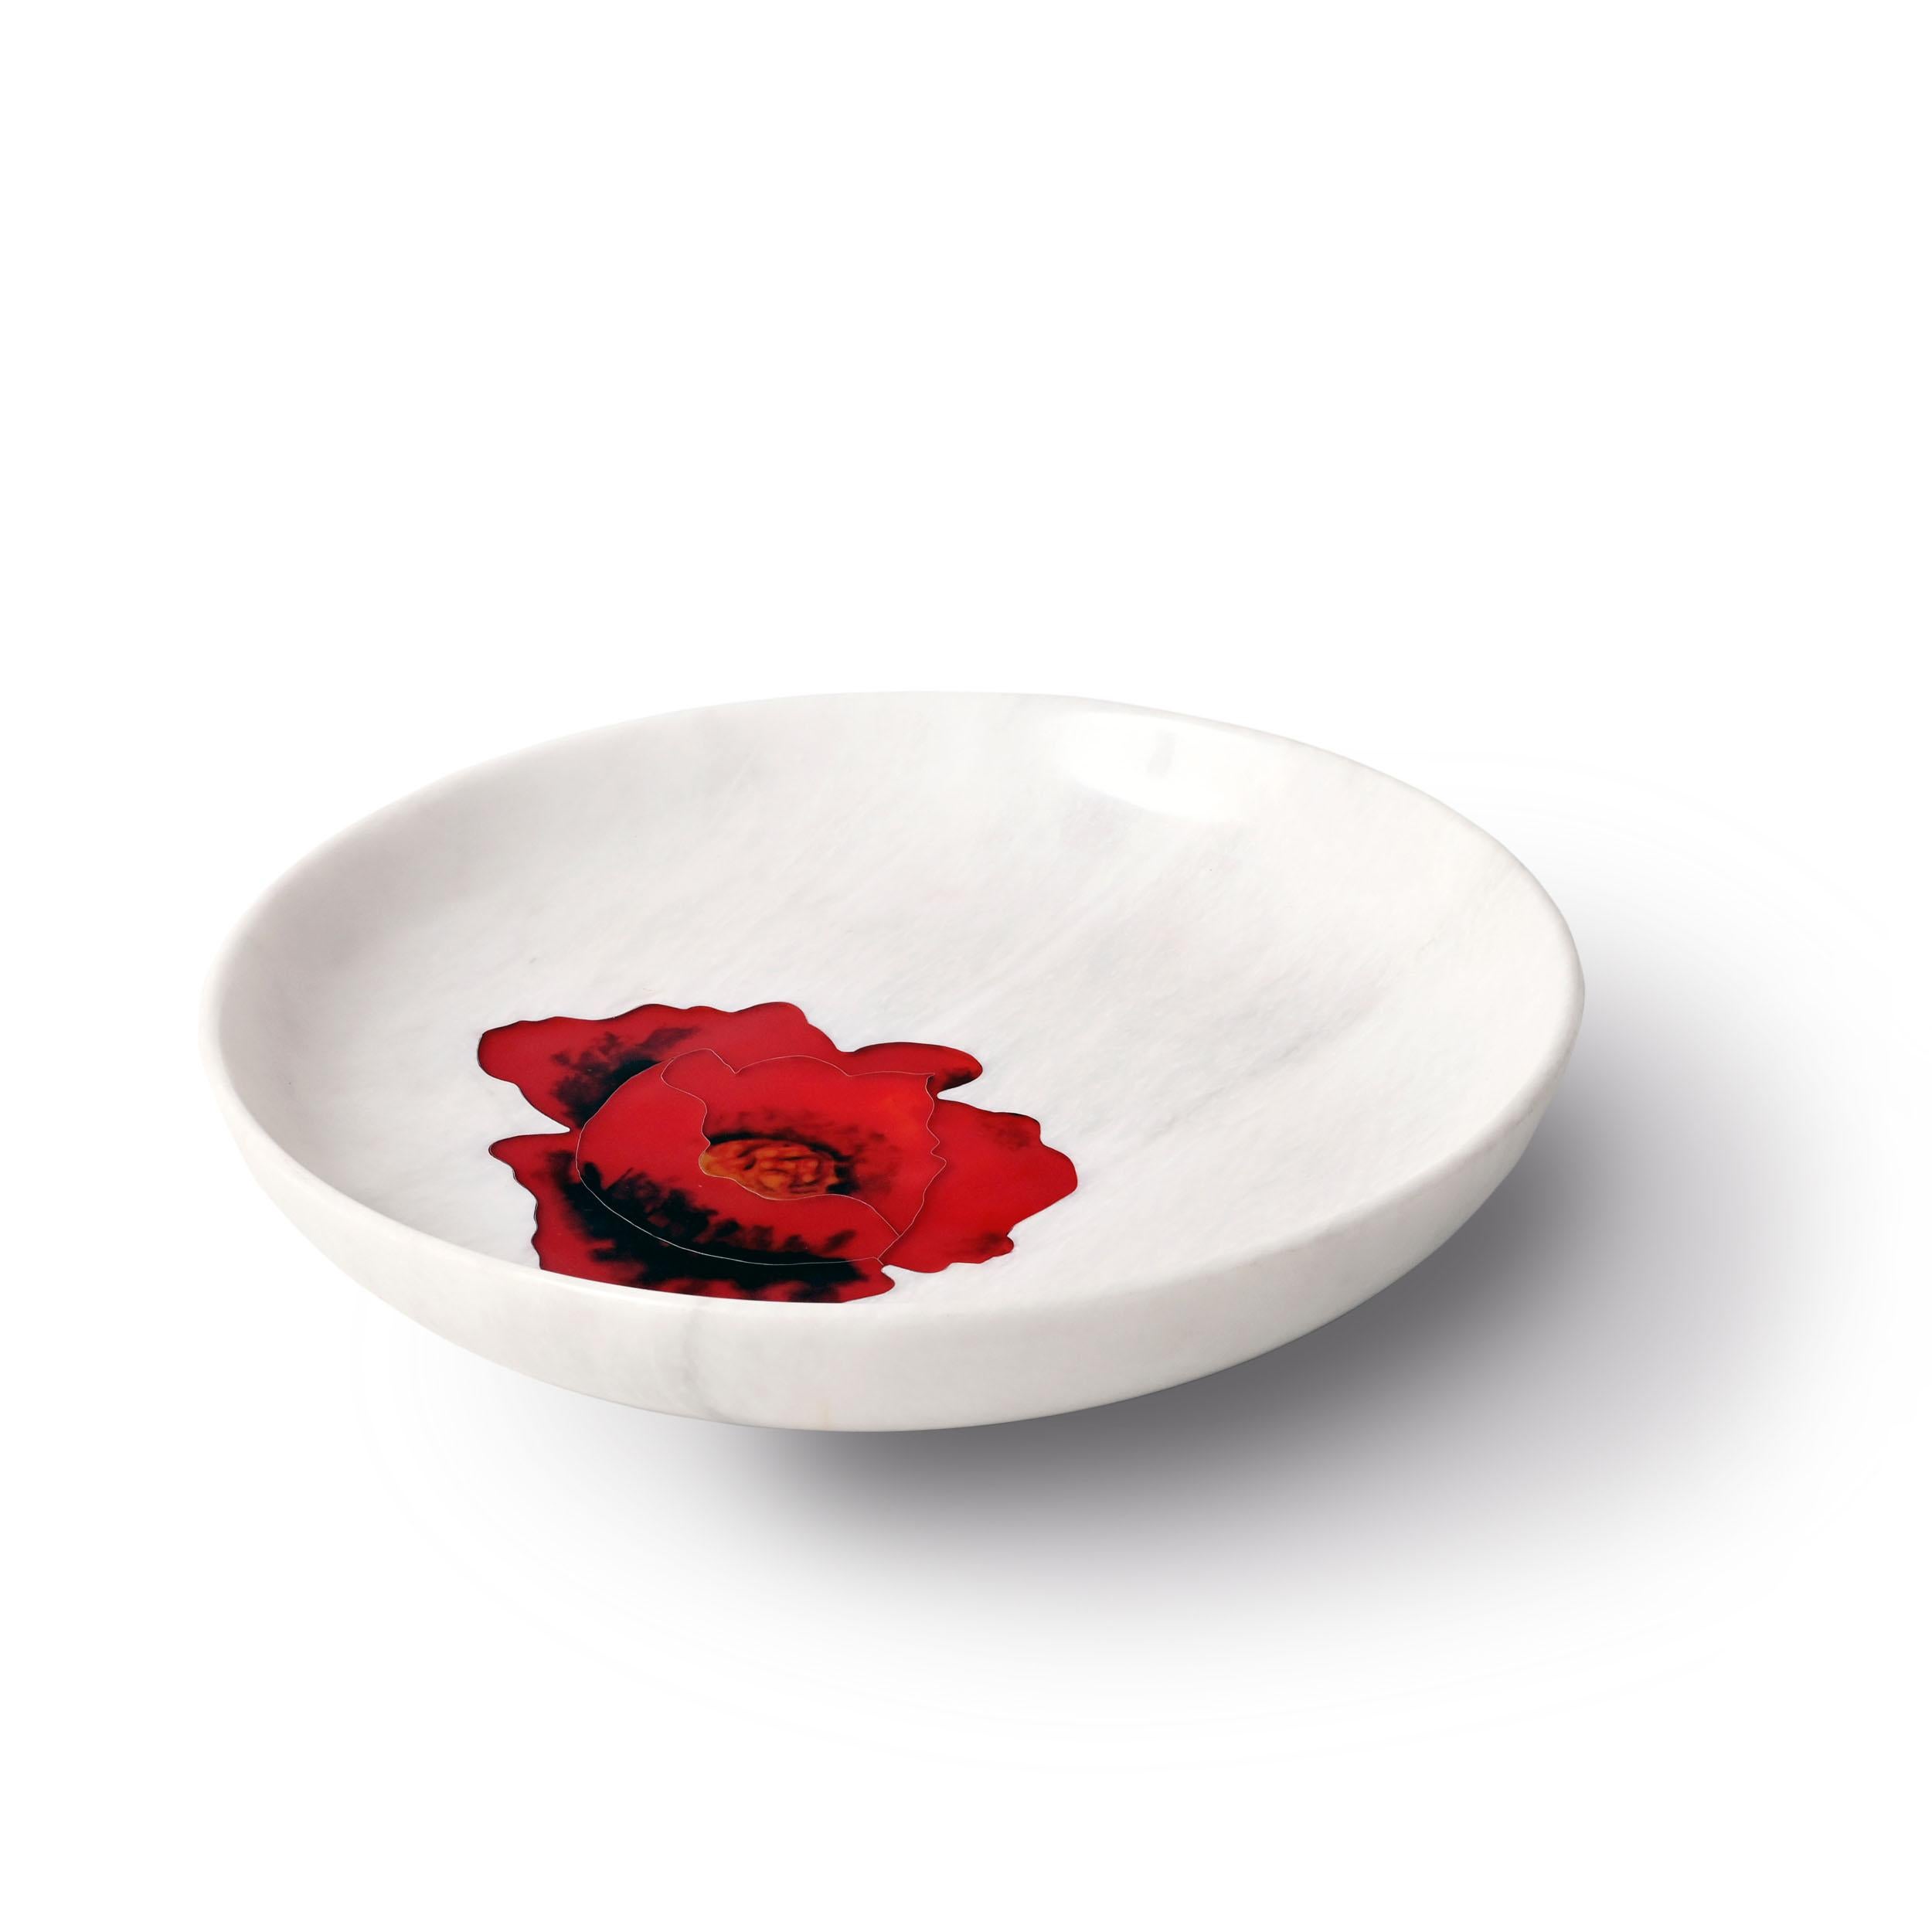 Reidi center piece by Studio Lel
Dimensions: D45.7 x W47.5 x H76.2 cm
Materials: Resin, Marble

The Reidi Collection takes its name from the Persian word for the poppy flower - marrying traditional craft techniques with contemporary design and